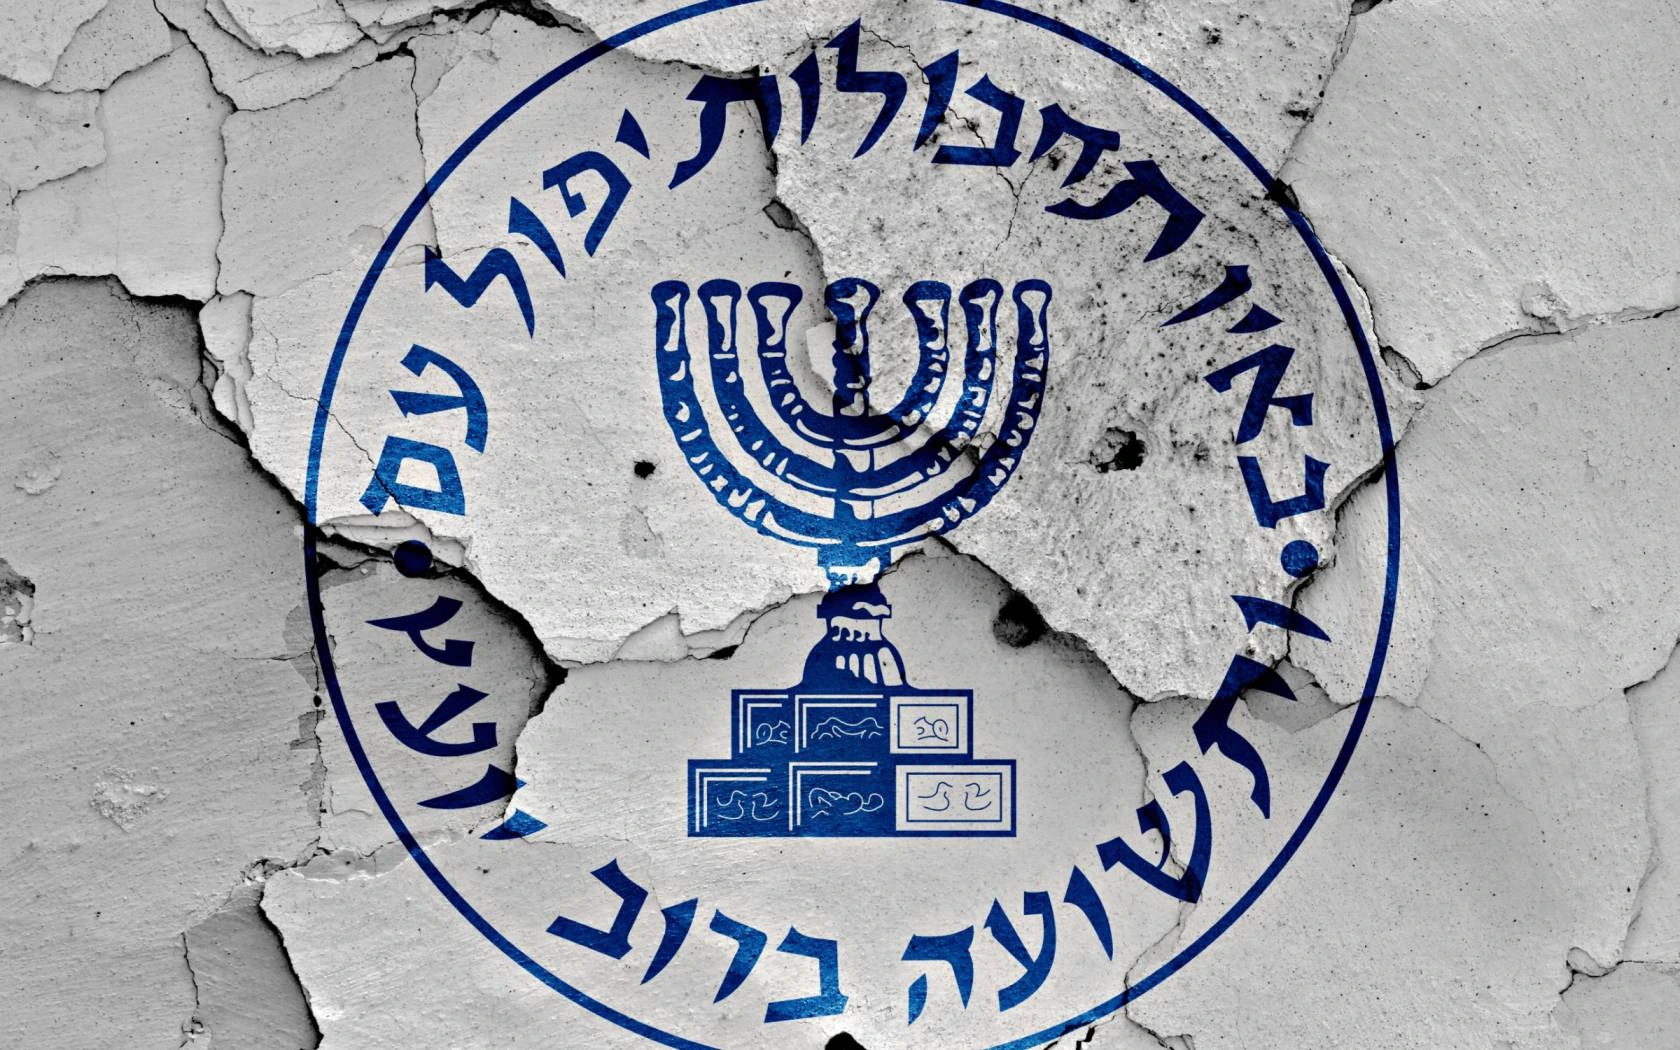 Mossad agents in a strategic planning session, with maps and documents spread out, planning an undercover operation, reflecting the agency's expertise in covert operations and intelligence.